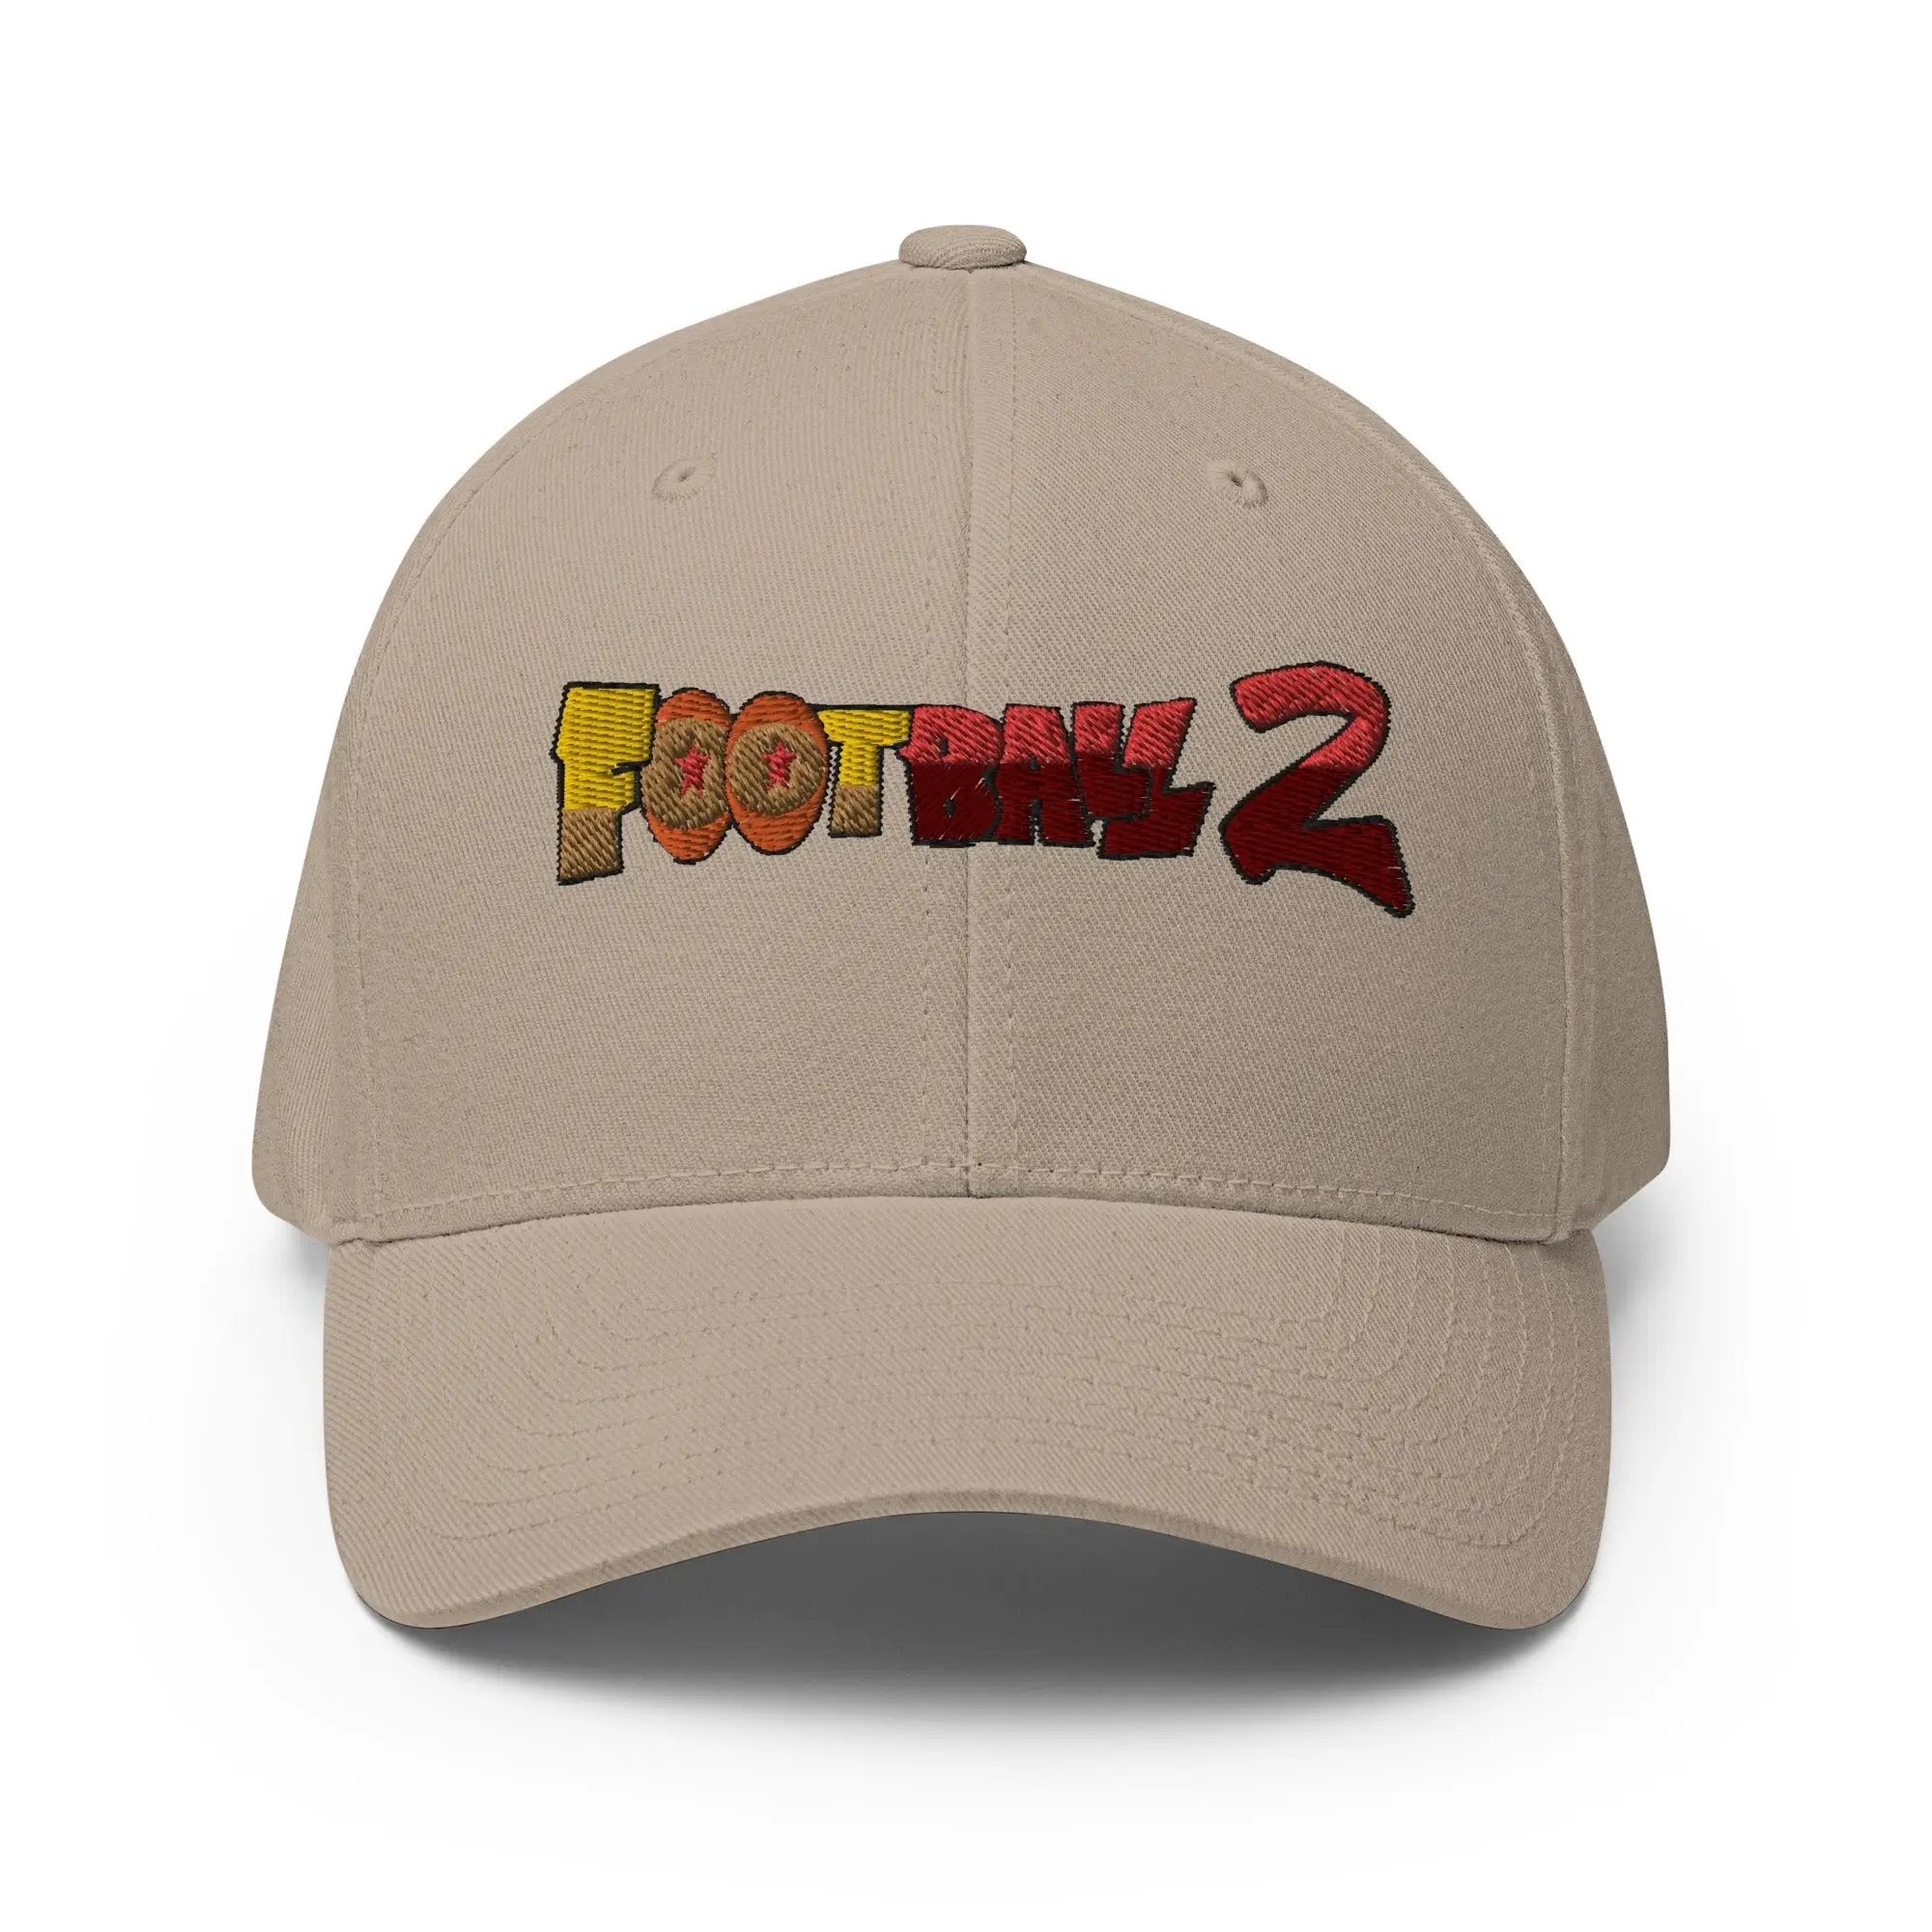 Football 2 Structured Twill Cap